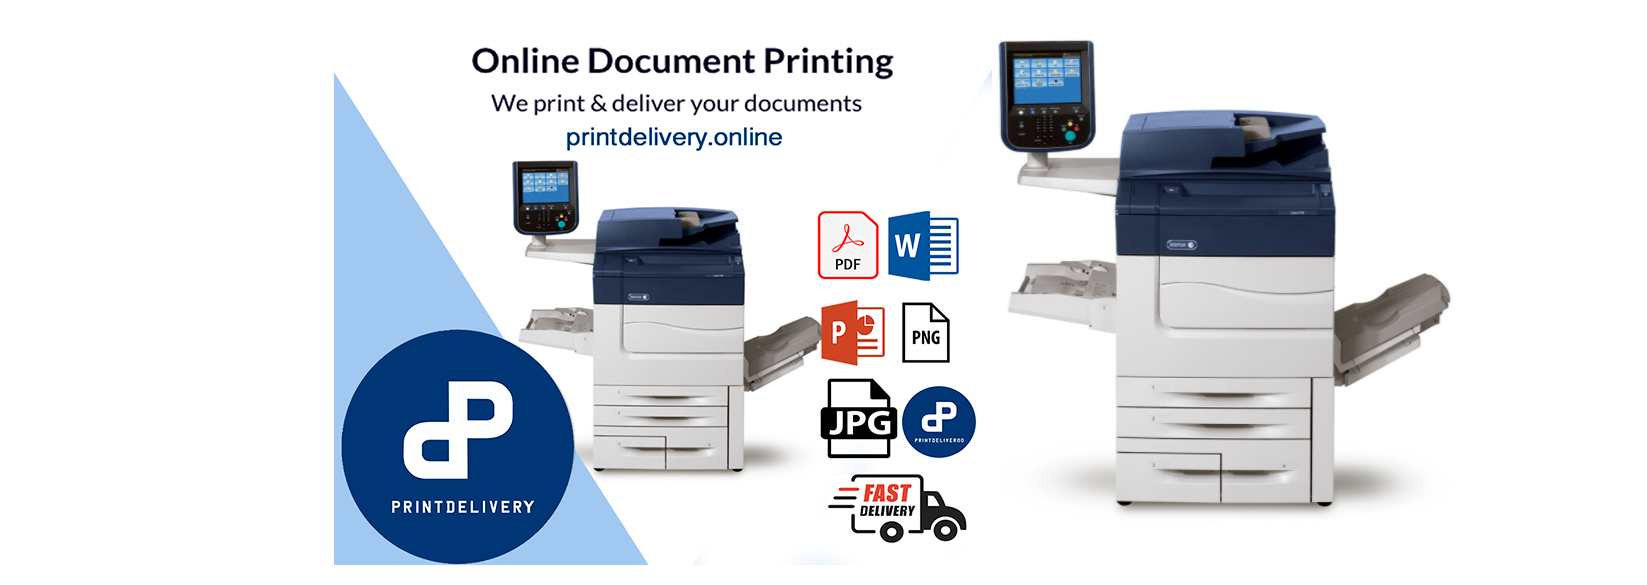 piso-printing-services-for-documents-shopee-philippines